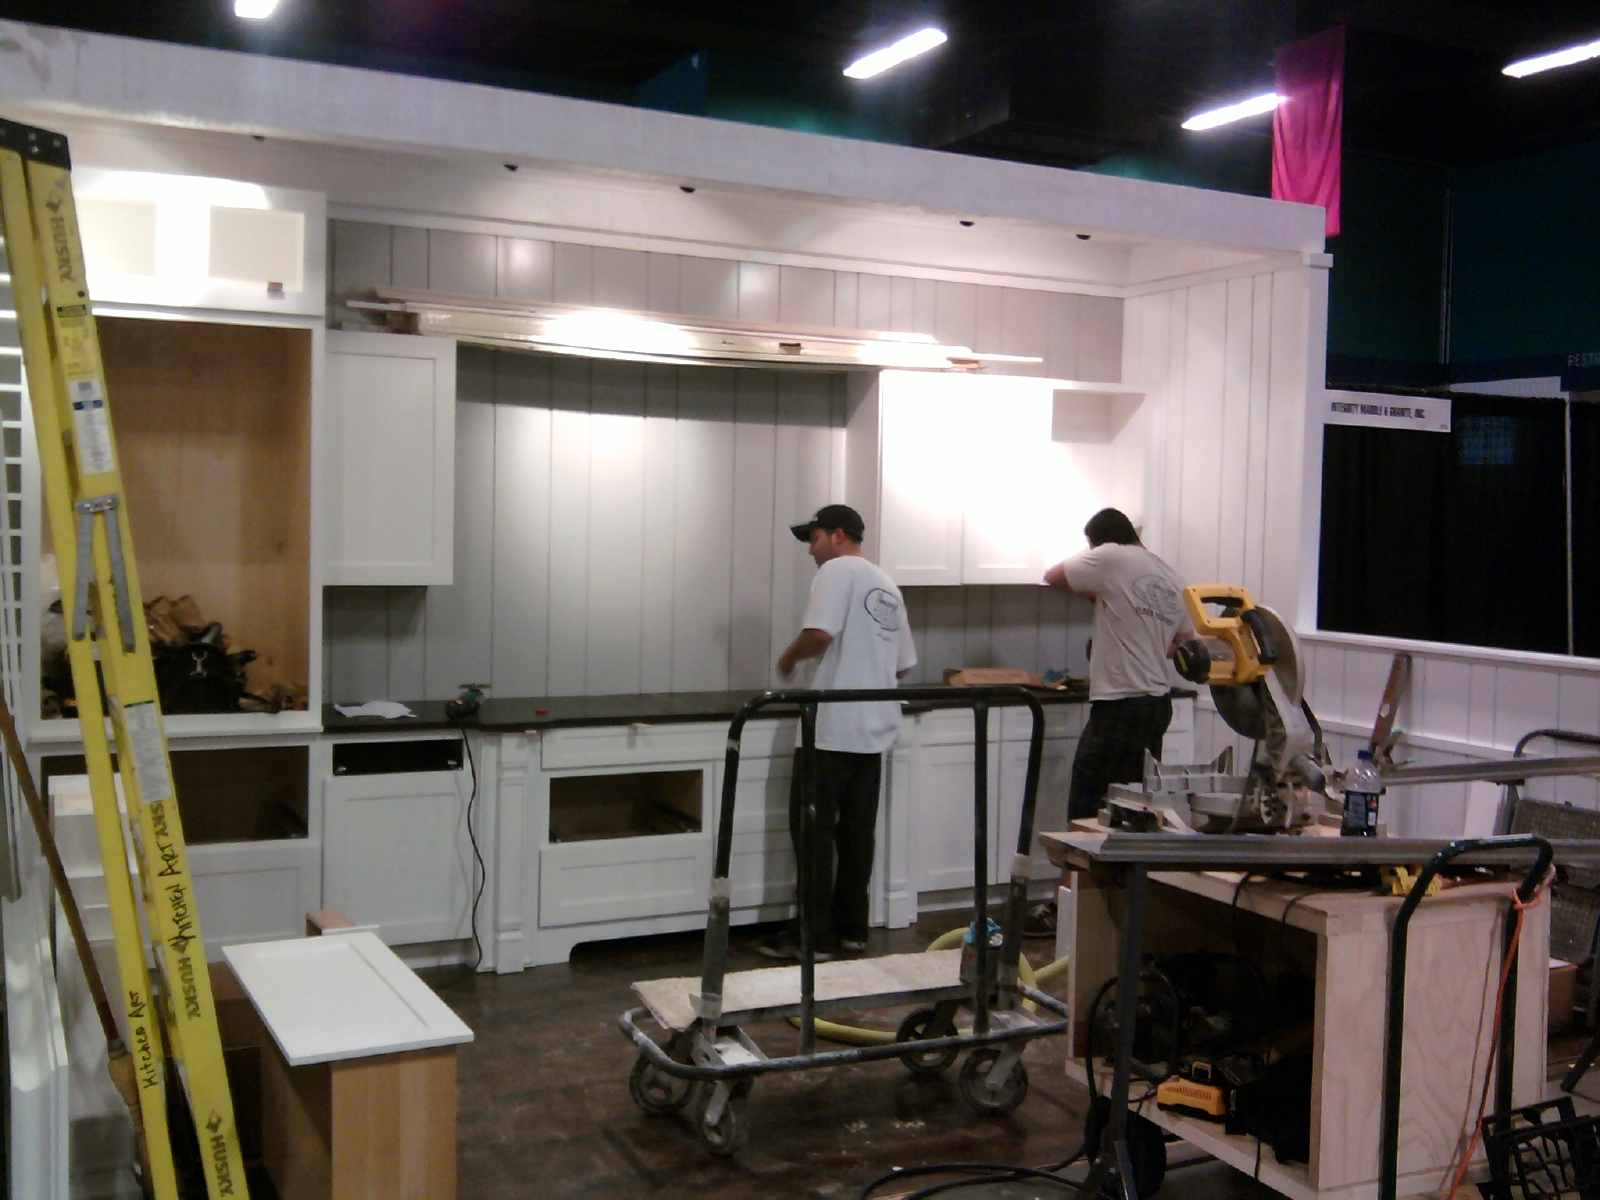 The Ideal home show 2012 Booth